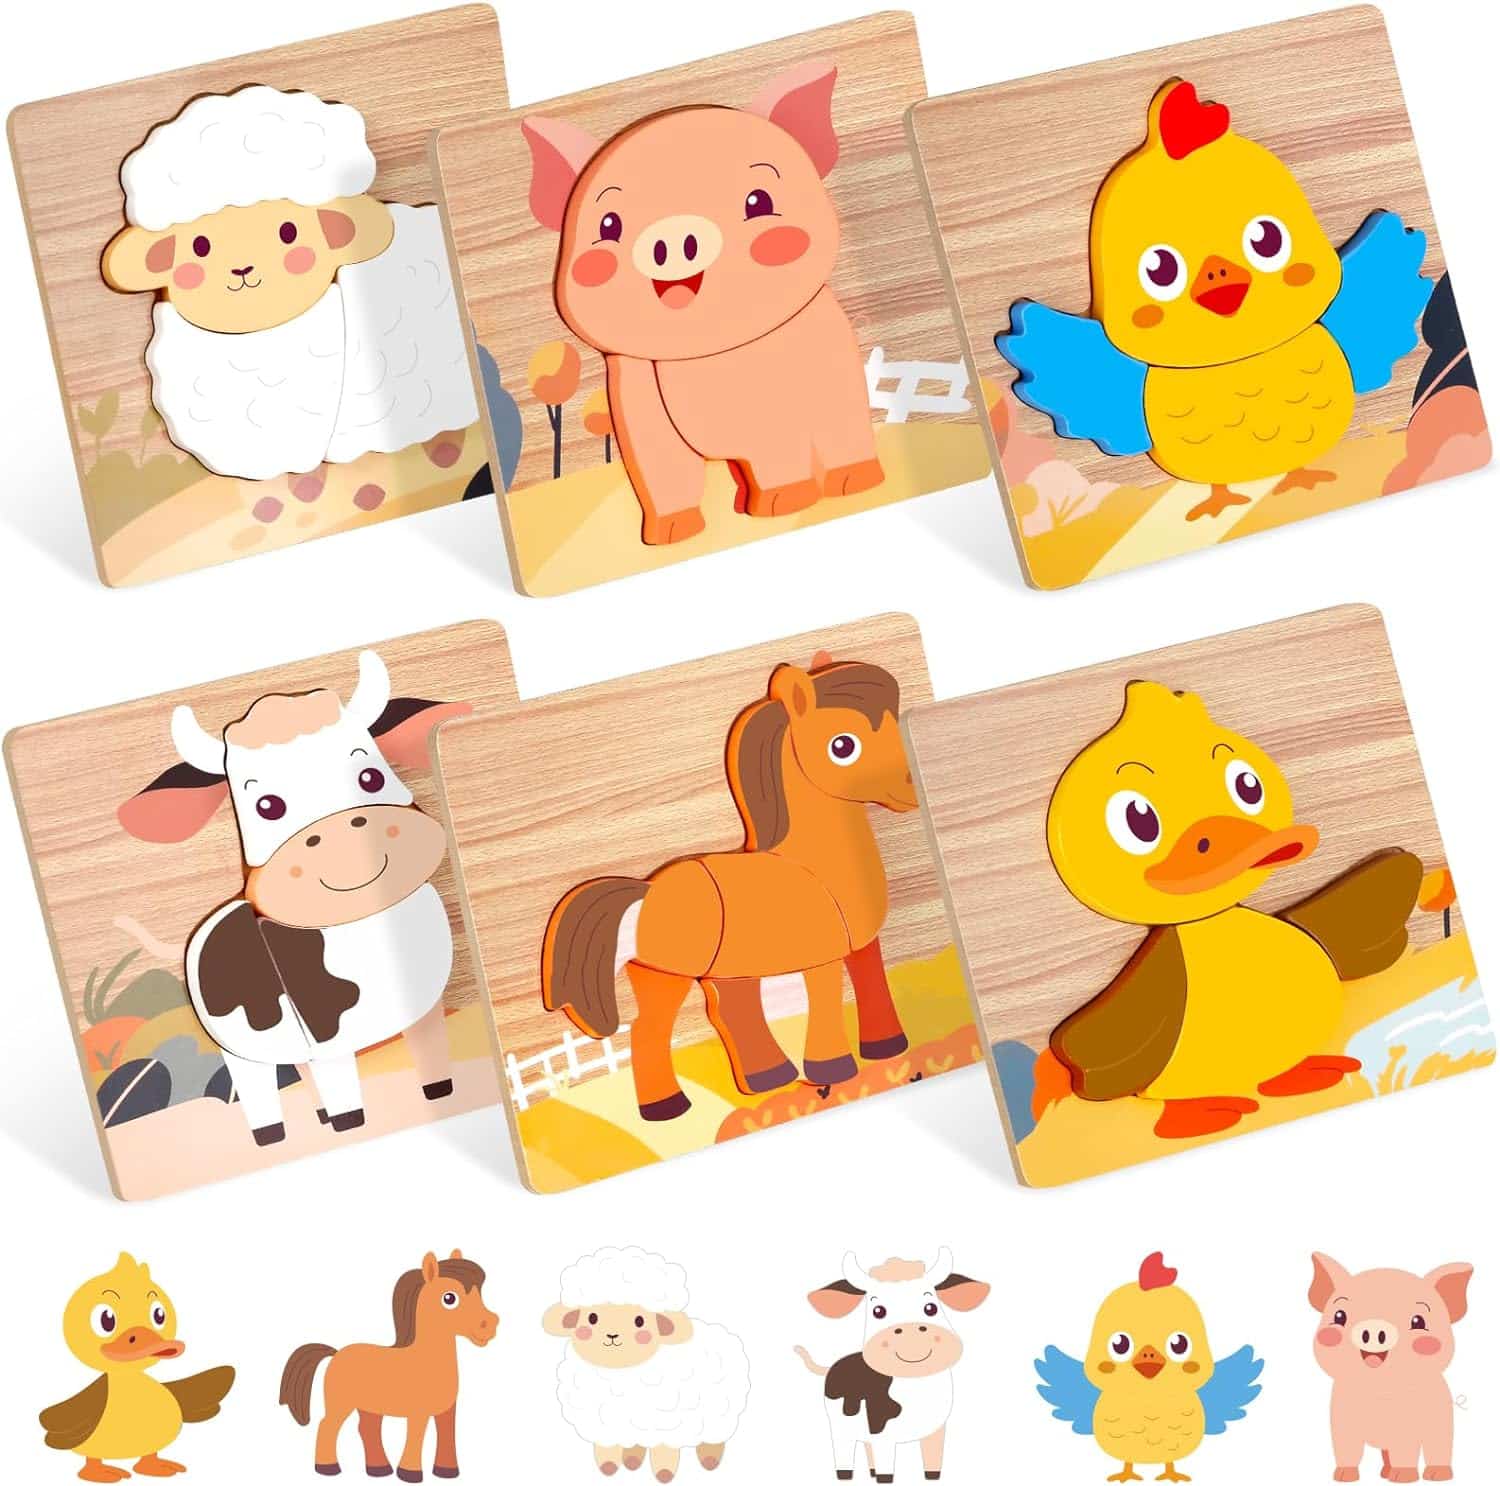 Wooden Puzzles for Toddlers 1-3, Farm Animals Jigsaw Puzzles for Baby Puzzles 12-18 Months, Learning Educational Puzzles for Kids Girl boy Birthday Gift Travel Autistic Wooden Toys